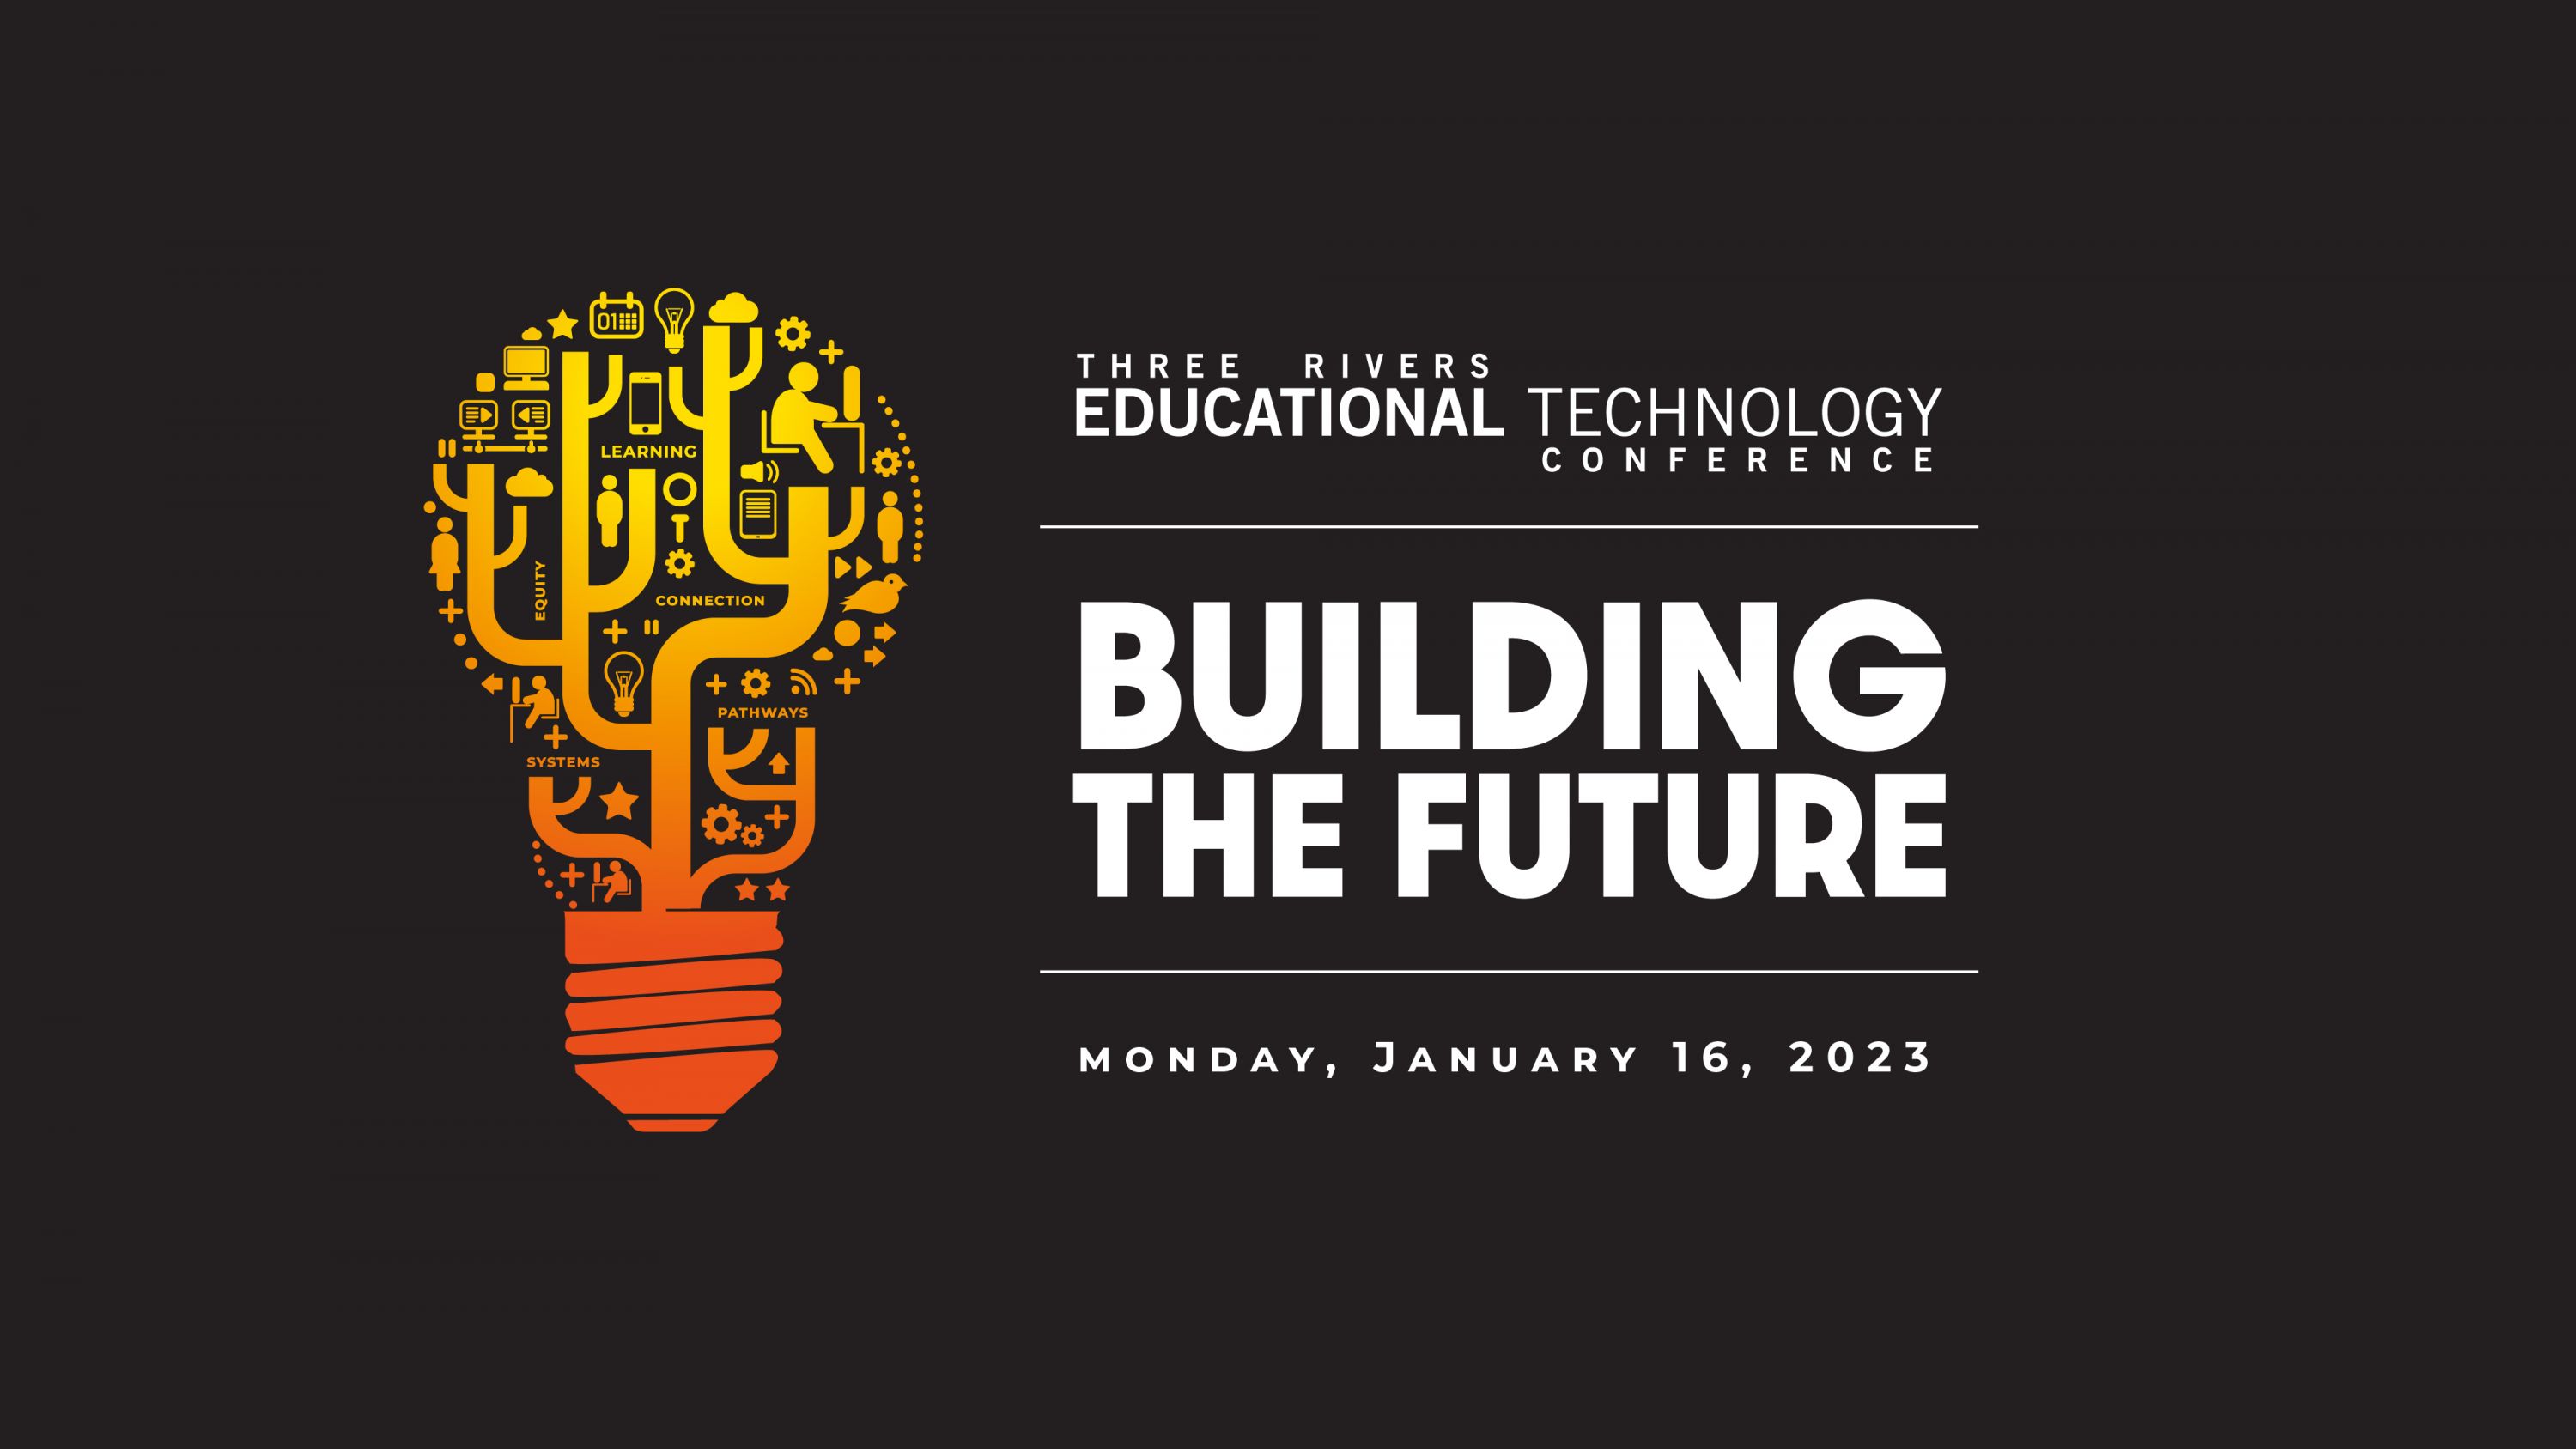 The Three Rivers Educational Technology Conference